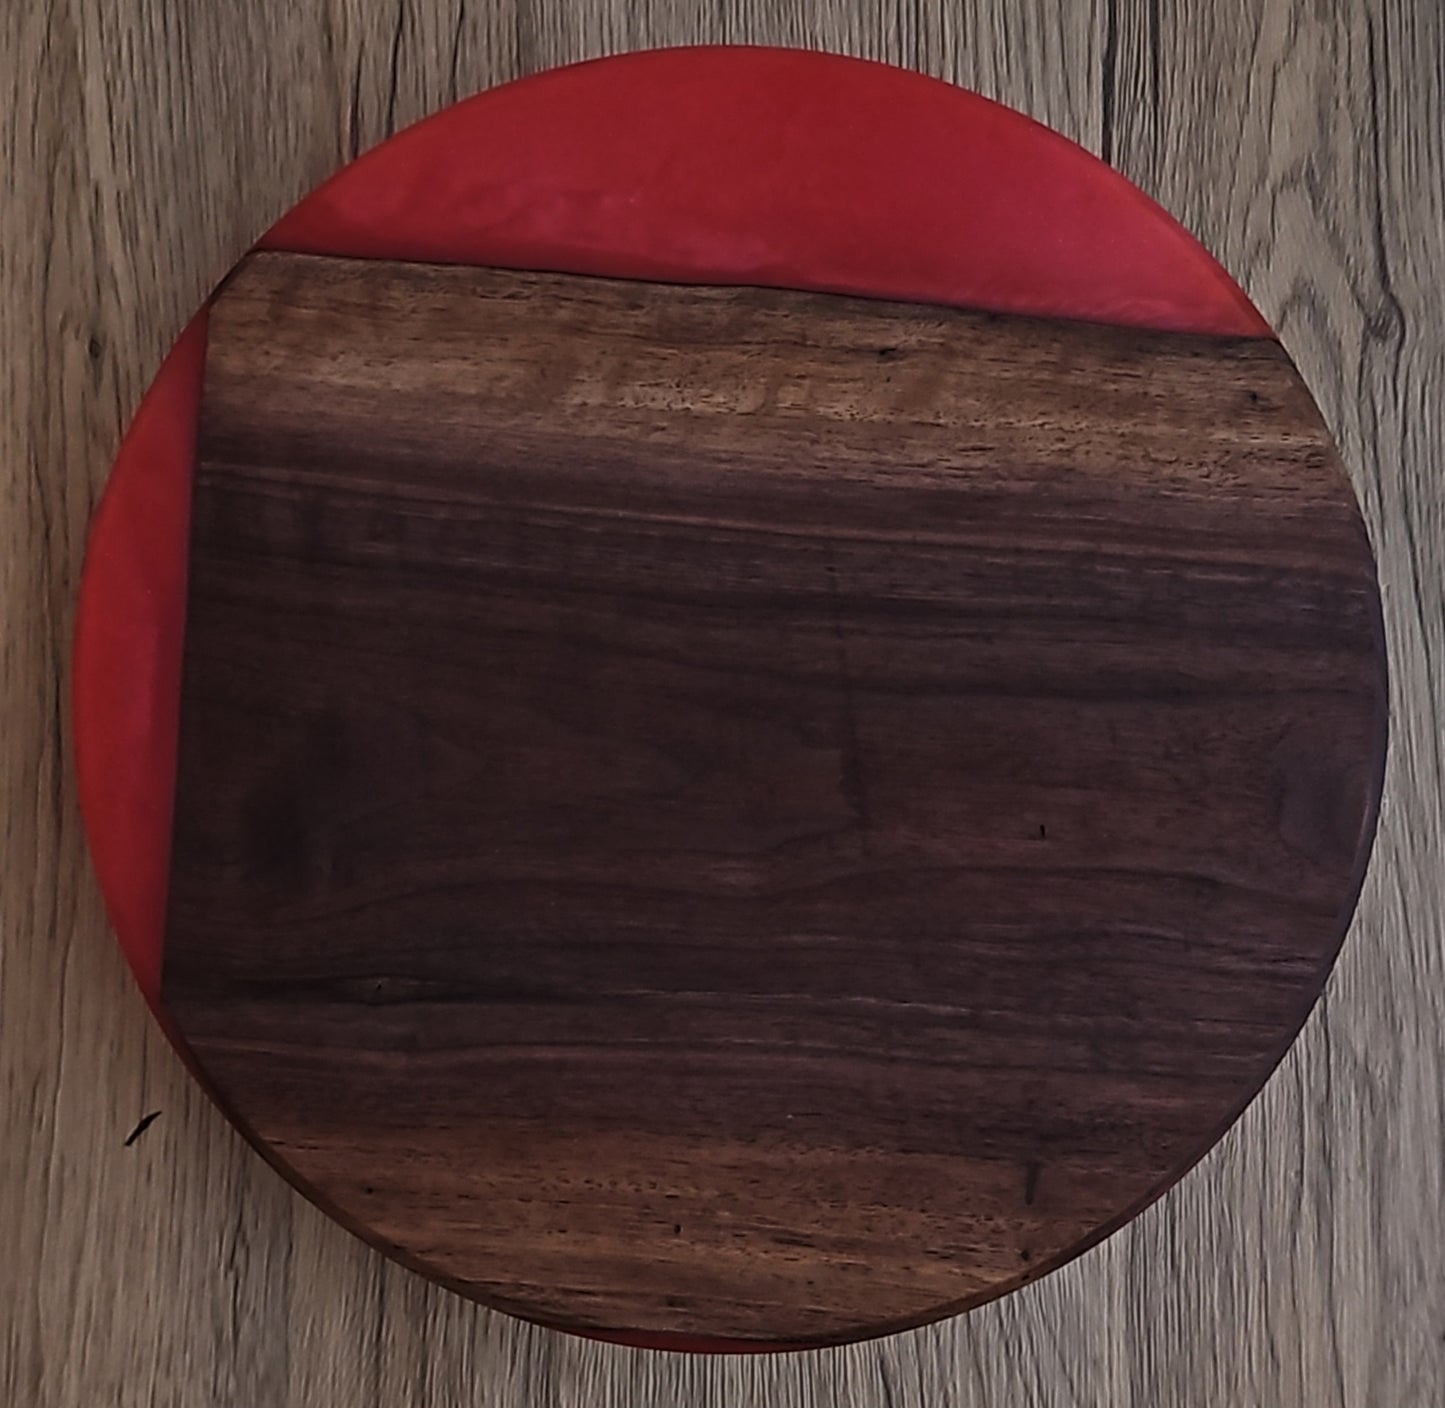 Lazy Susan made of solid Walnut and Red Epoxy